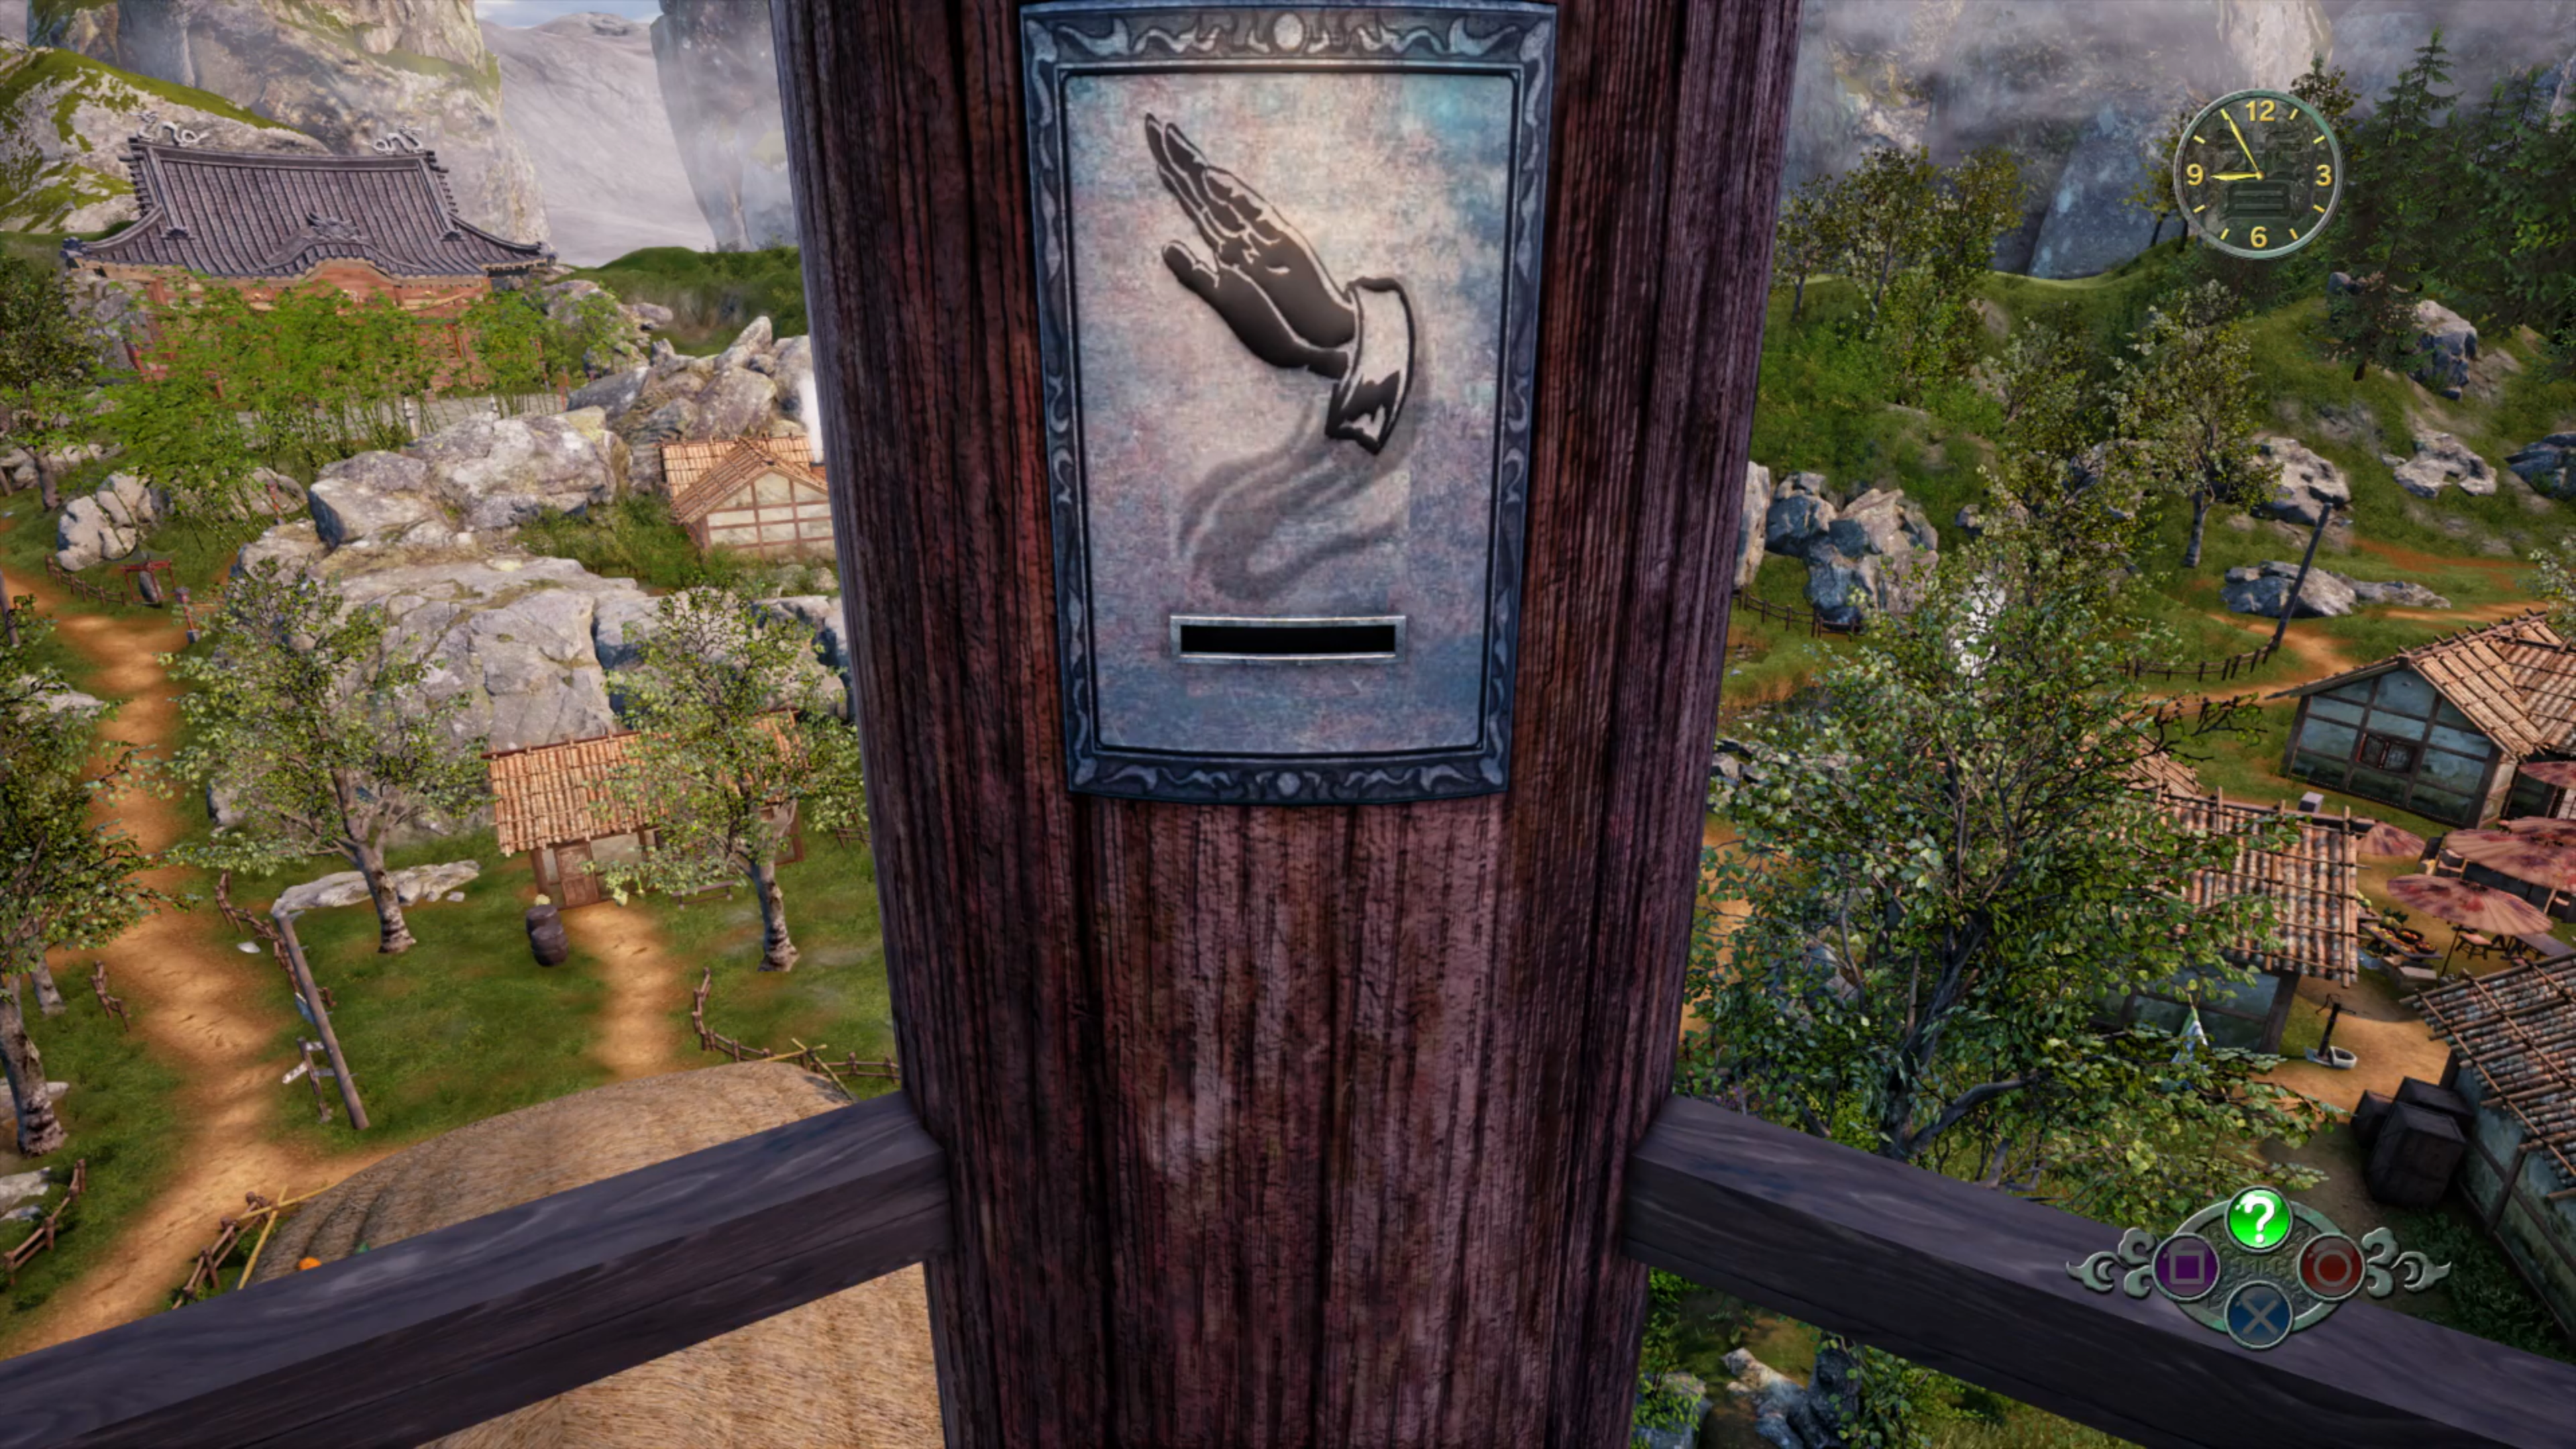 Image for Shenmue 3 bell tower puzzle - where to find the tokens and complete the puzzle